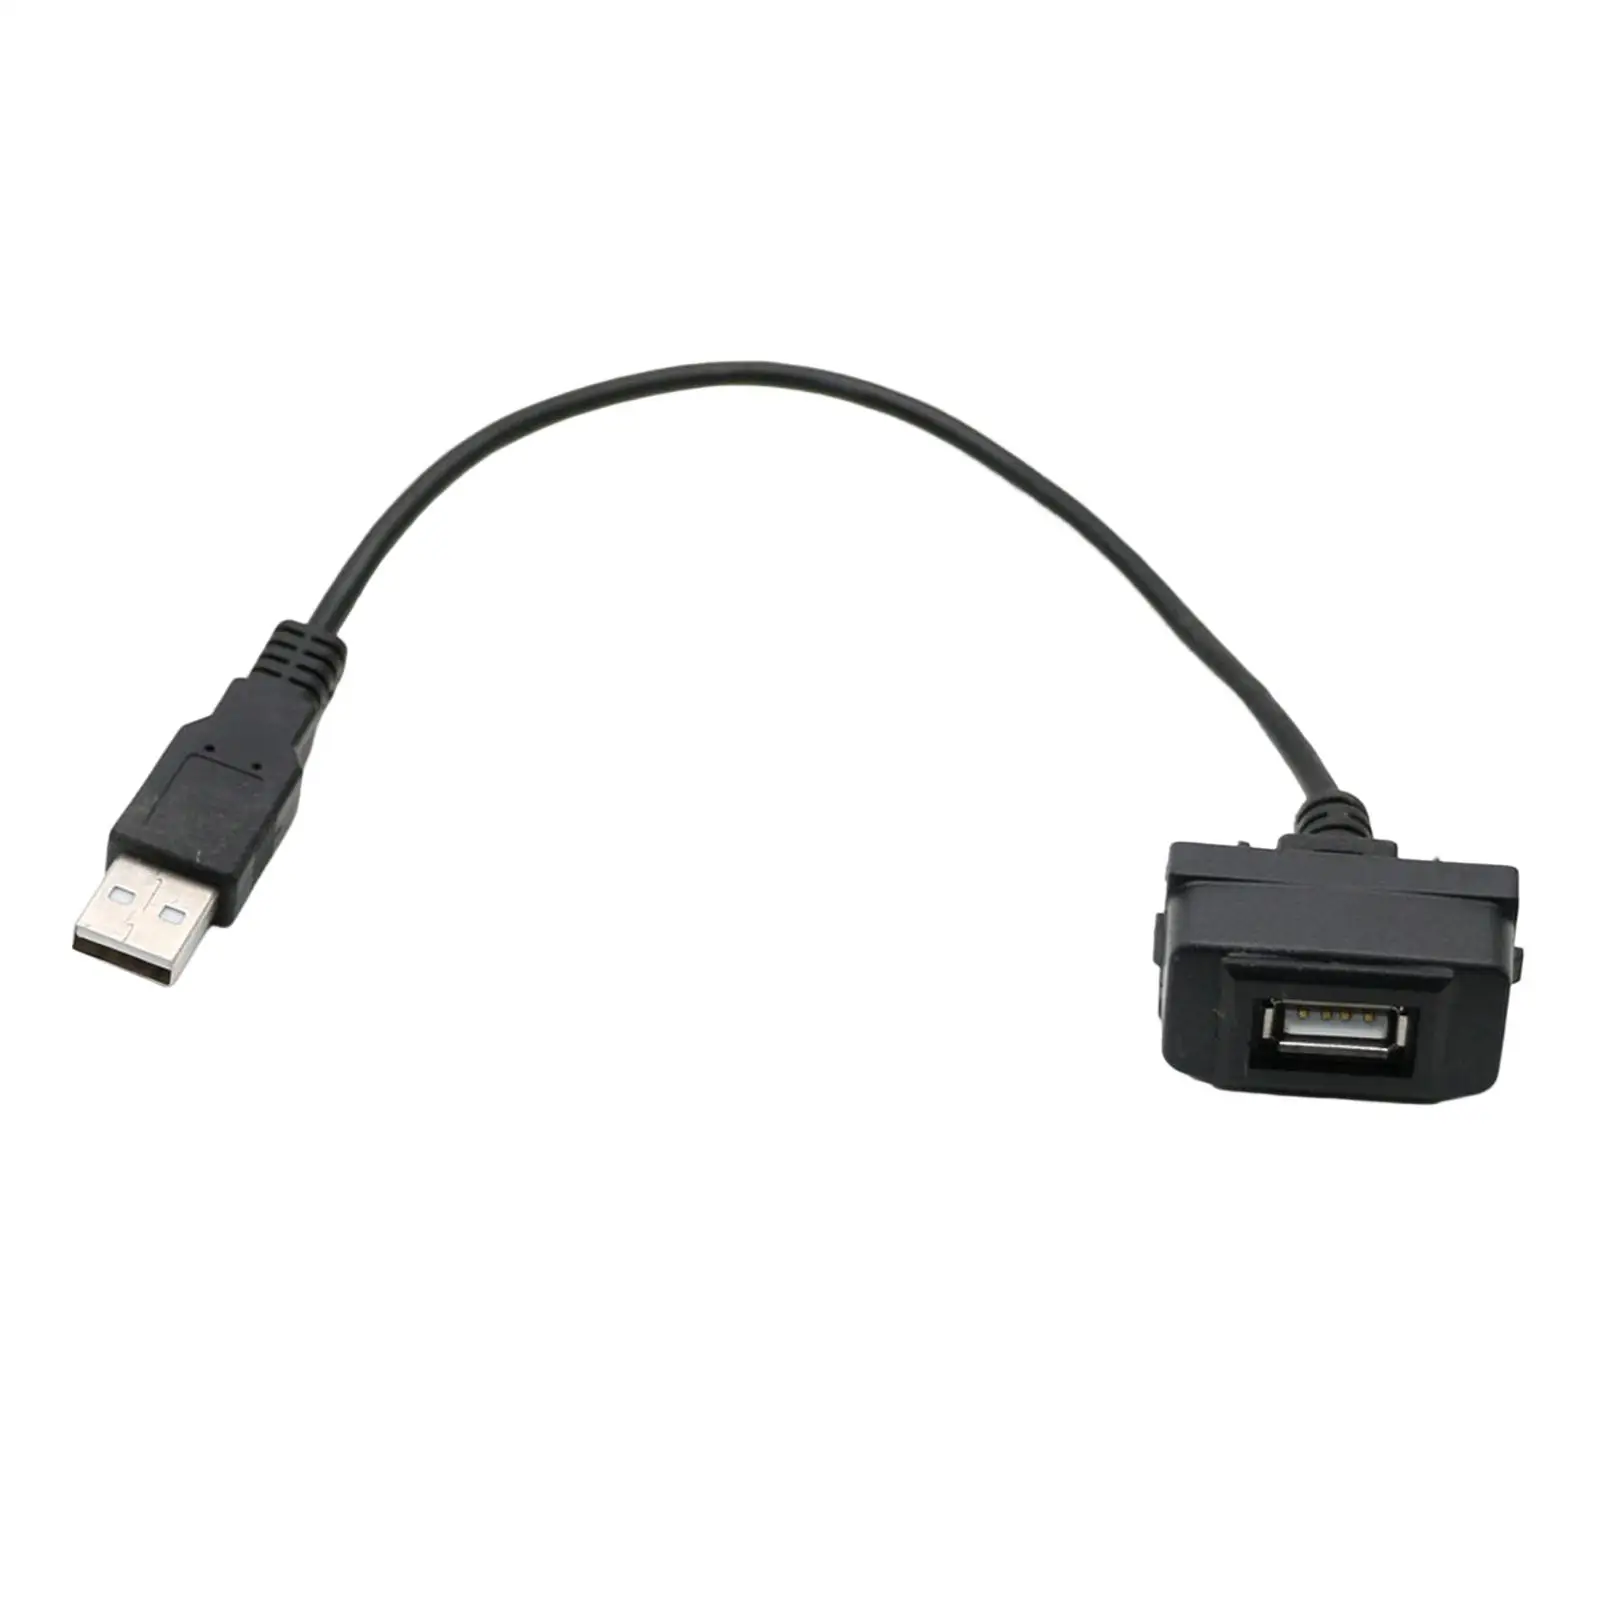 Car USB Interface Adapter Cable Extension Cable Adapter for Asx